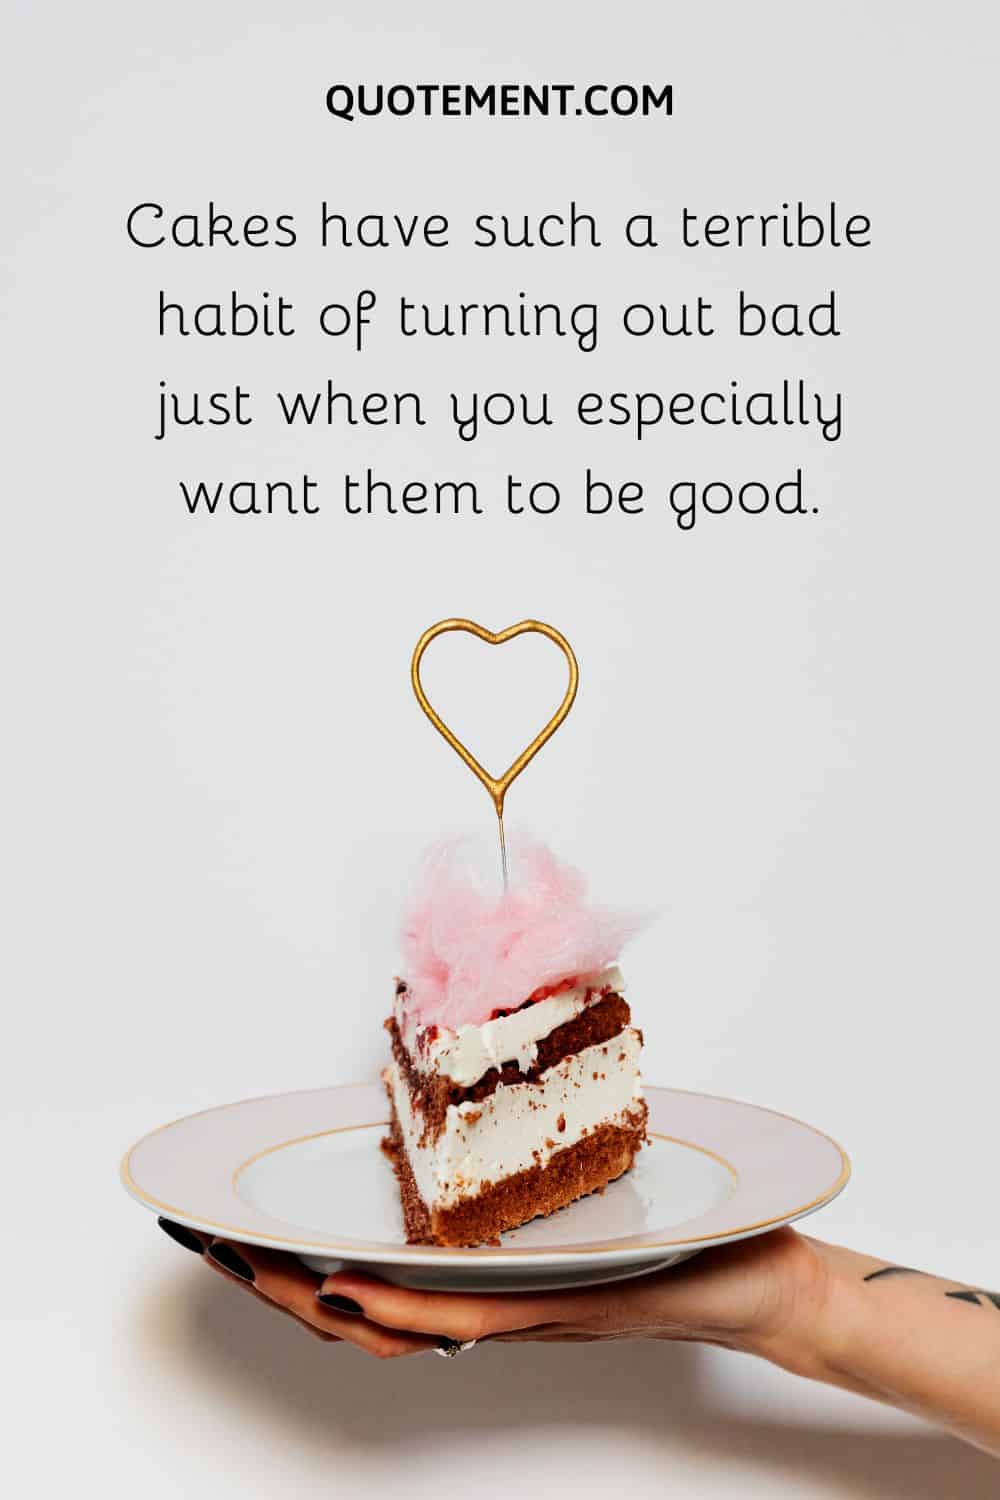 Cakes have such a terrible habit